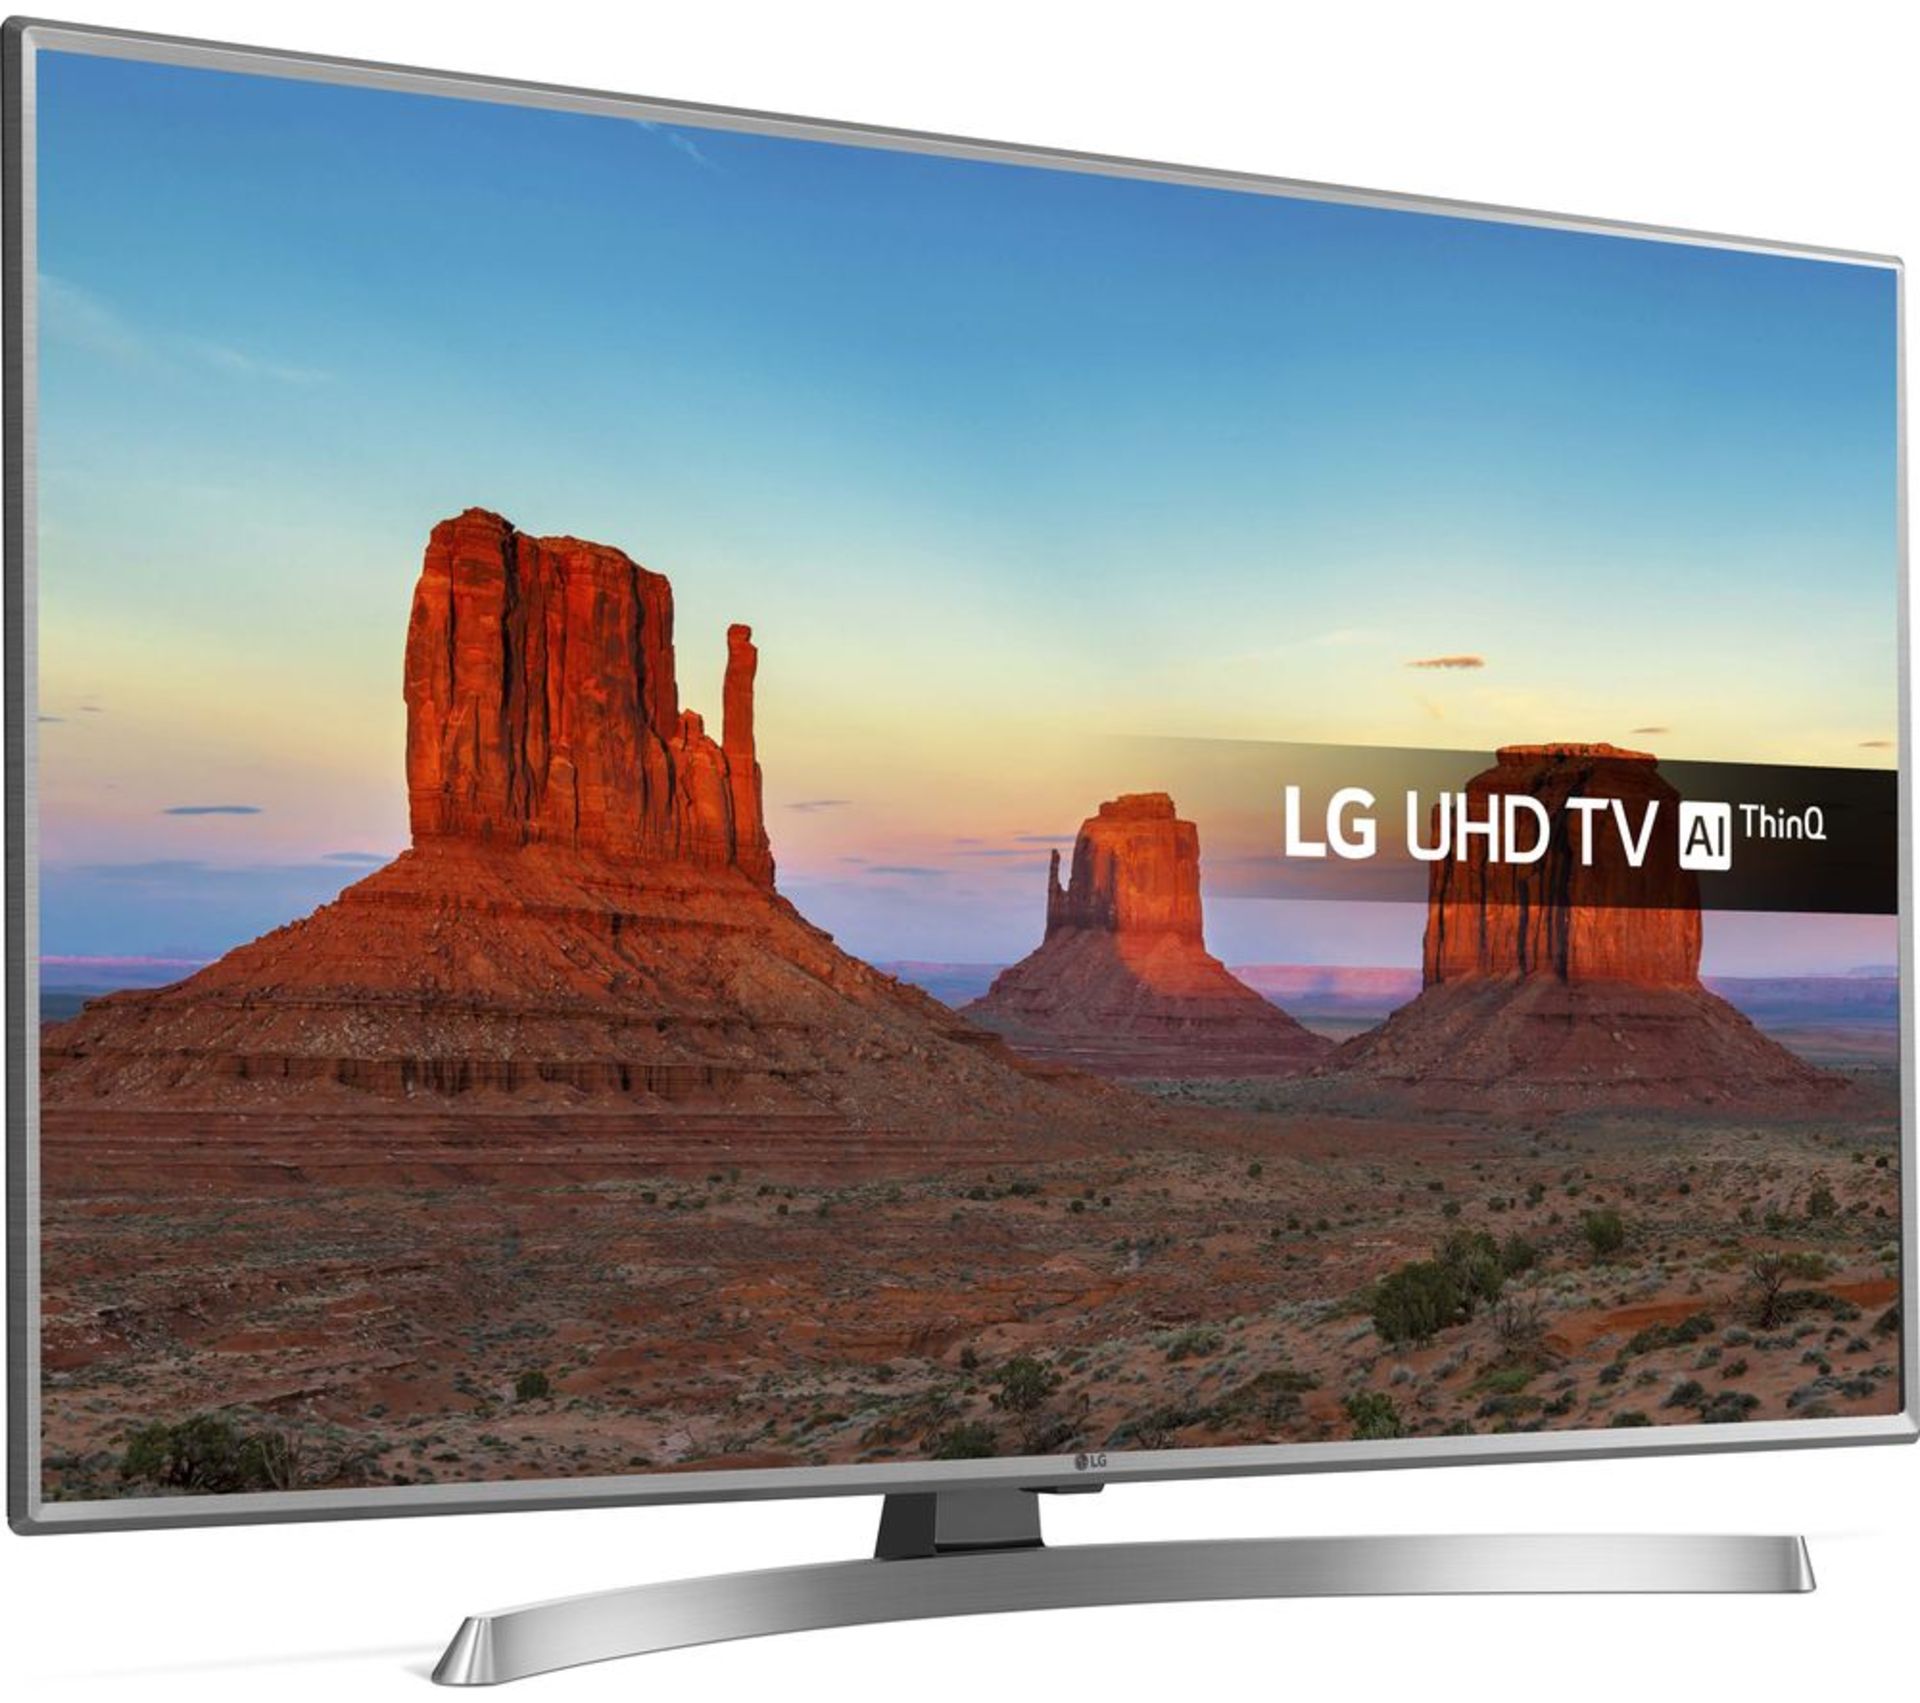 V Grade A LG 50 Inch ACTIVE HDR 4K ULTRA HD LED SMART TV WITH FREEVIEW HD & WEBOS 4.0 & WIFI - AI TV